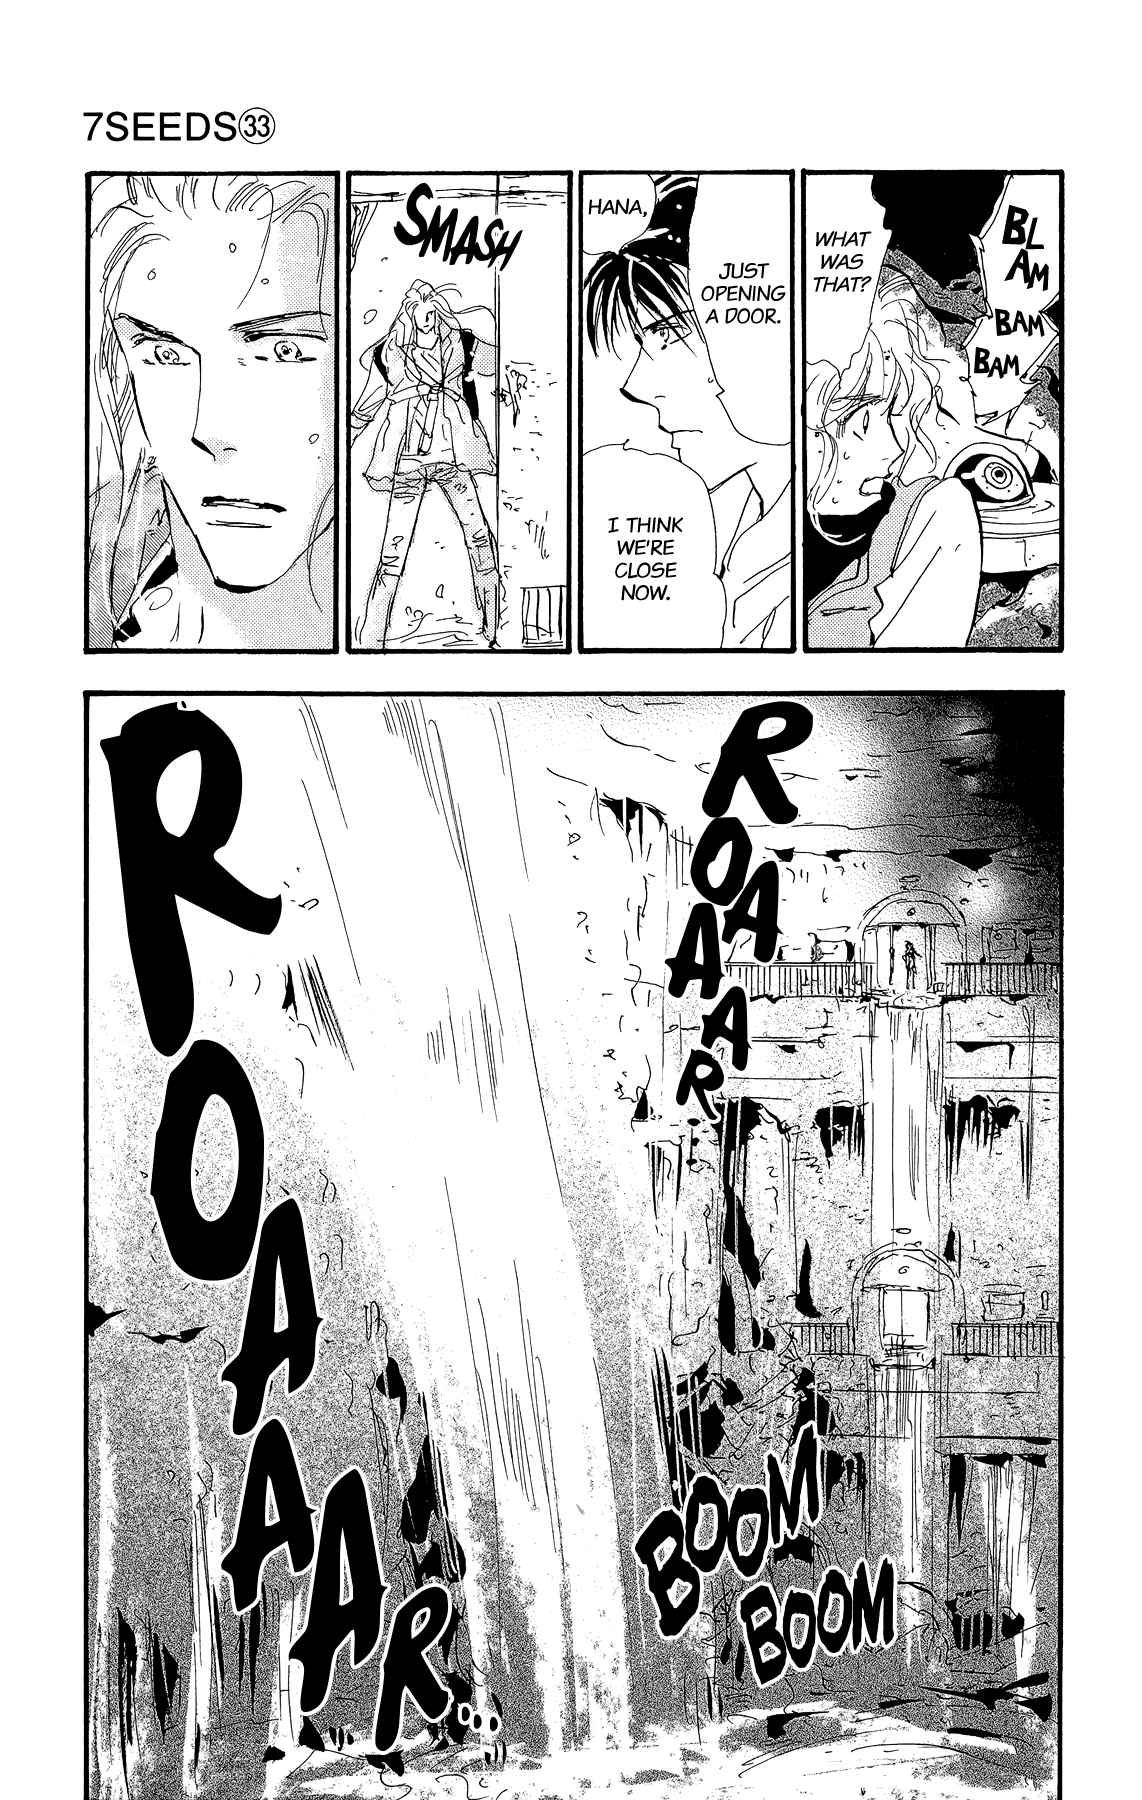 7 Seeds Vol. 33 Ch. 167 Sky Chapter 4 [Resolve]